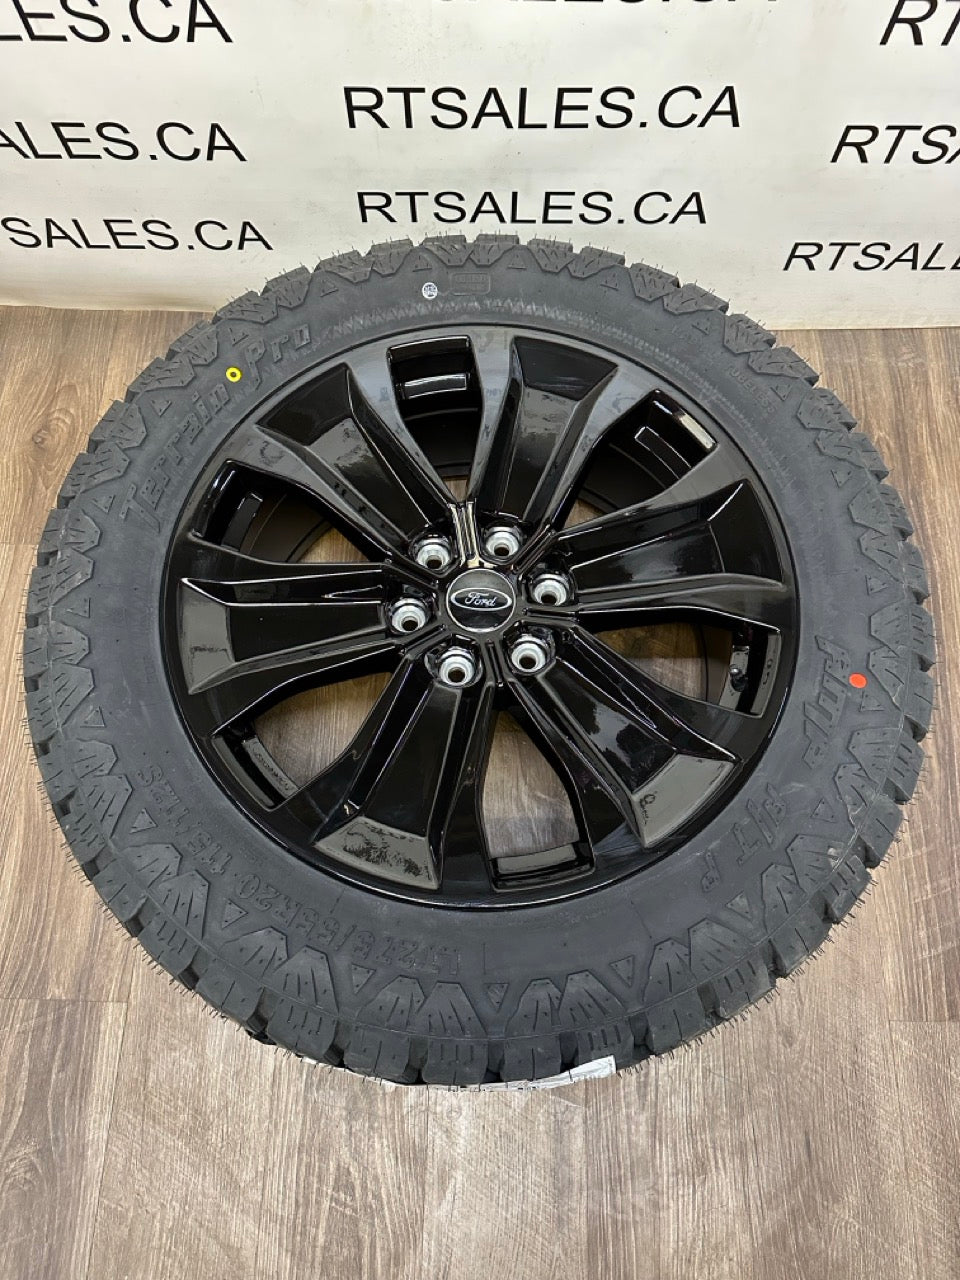 275/55/20 All terrain tires on rims Ford F-150